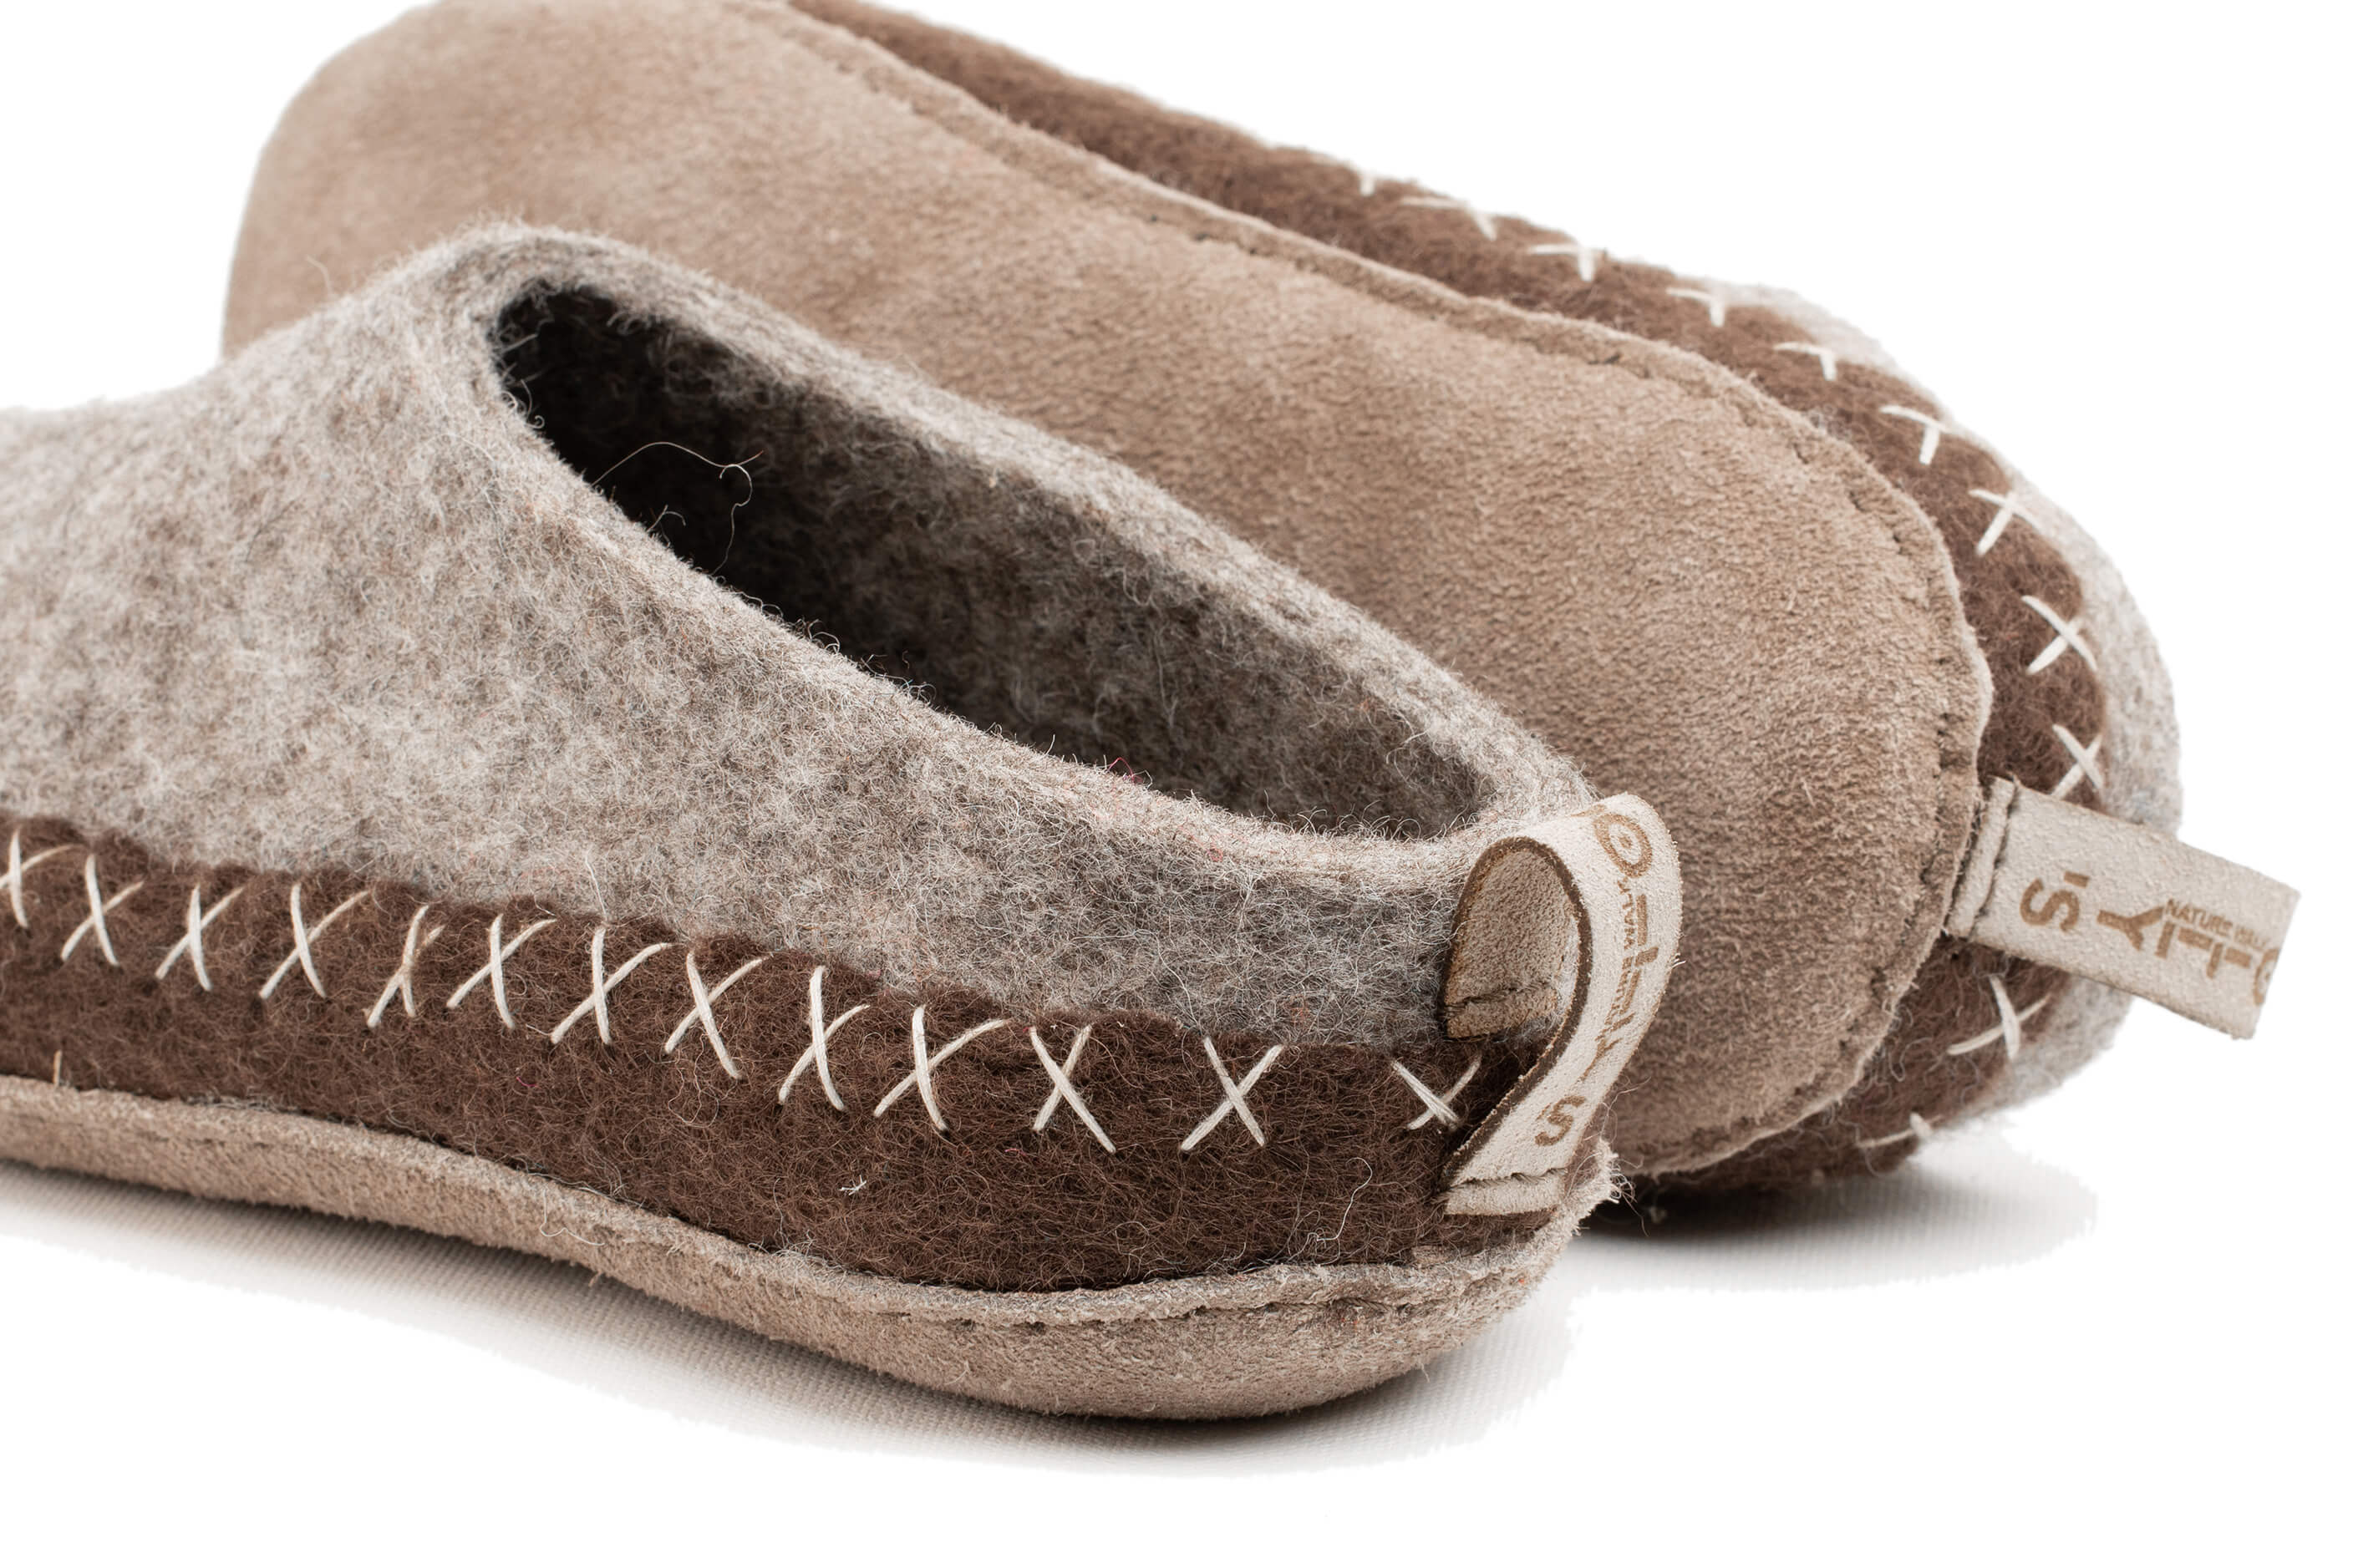 Indoor Open Heel Slipper With Leather Sole - Natural Brown & Light Brown